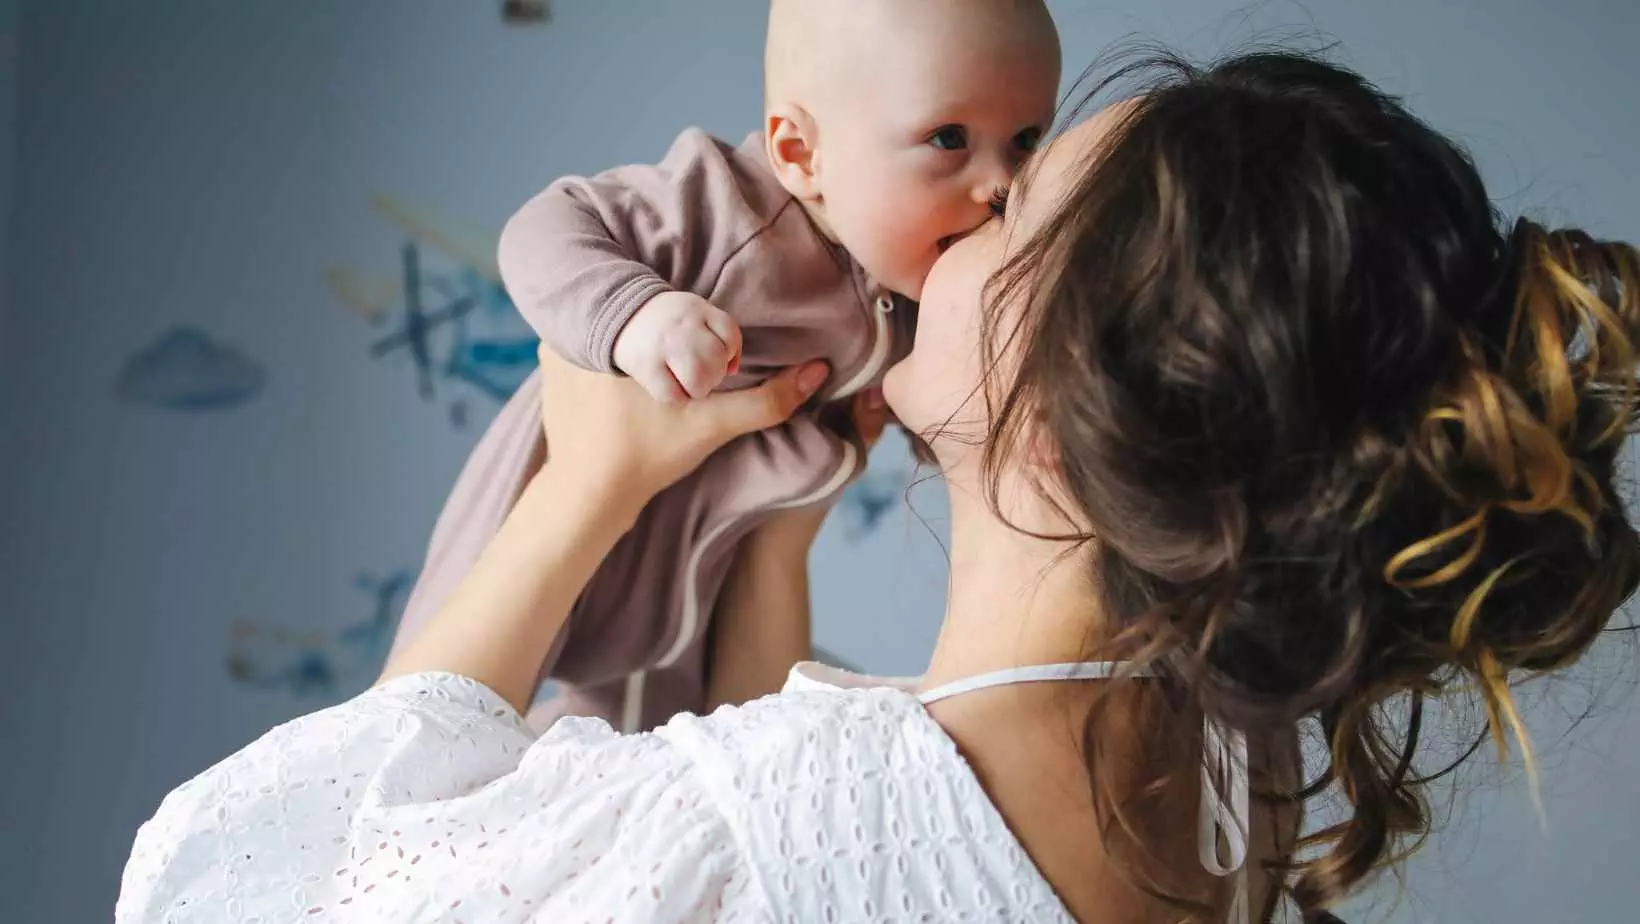 Brunette woman seen from behind holding a baby to her face and smiling